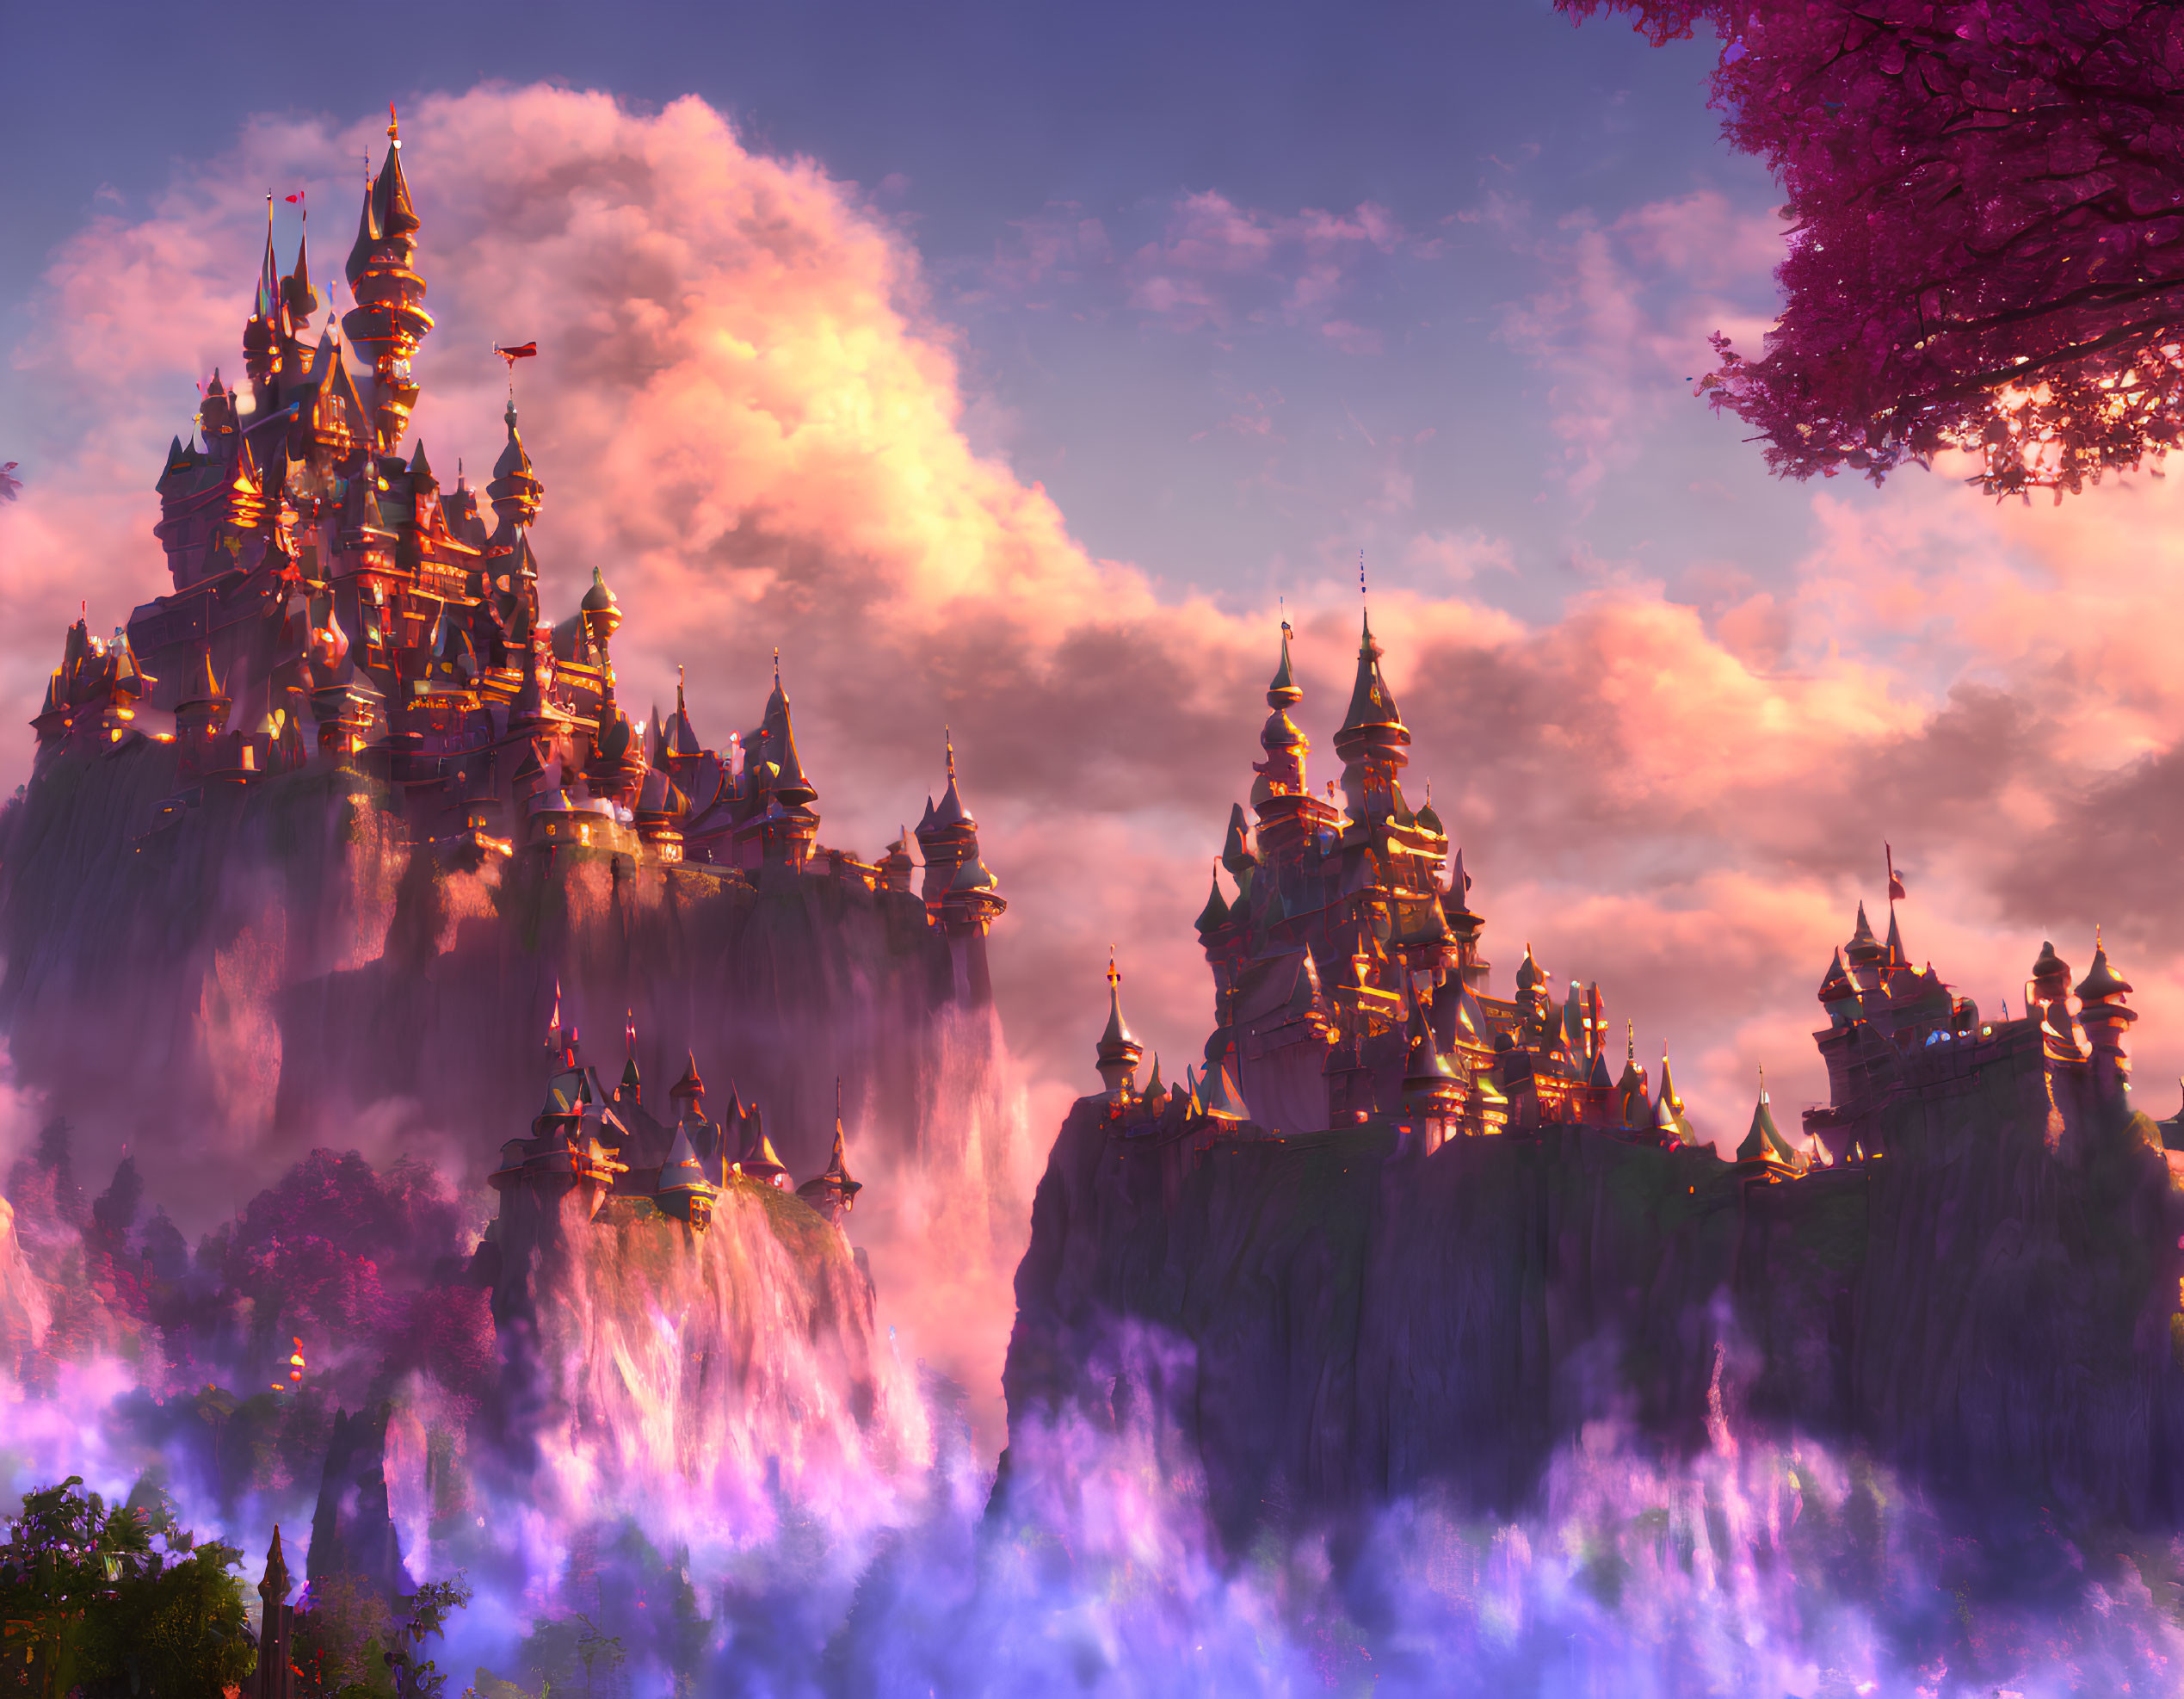 Fantasy castle on cliff with waterfalls, pink clouds, warm glow